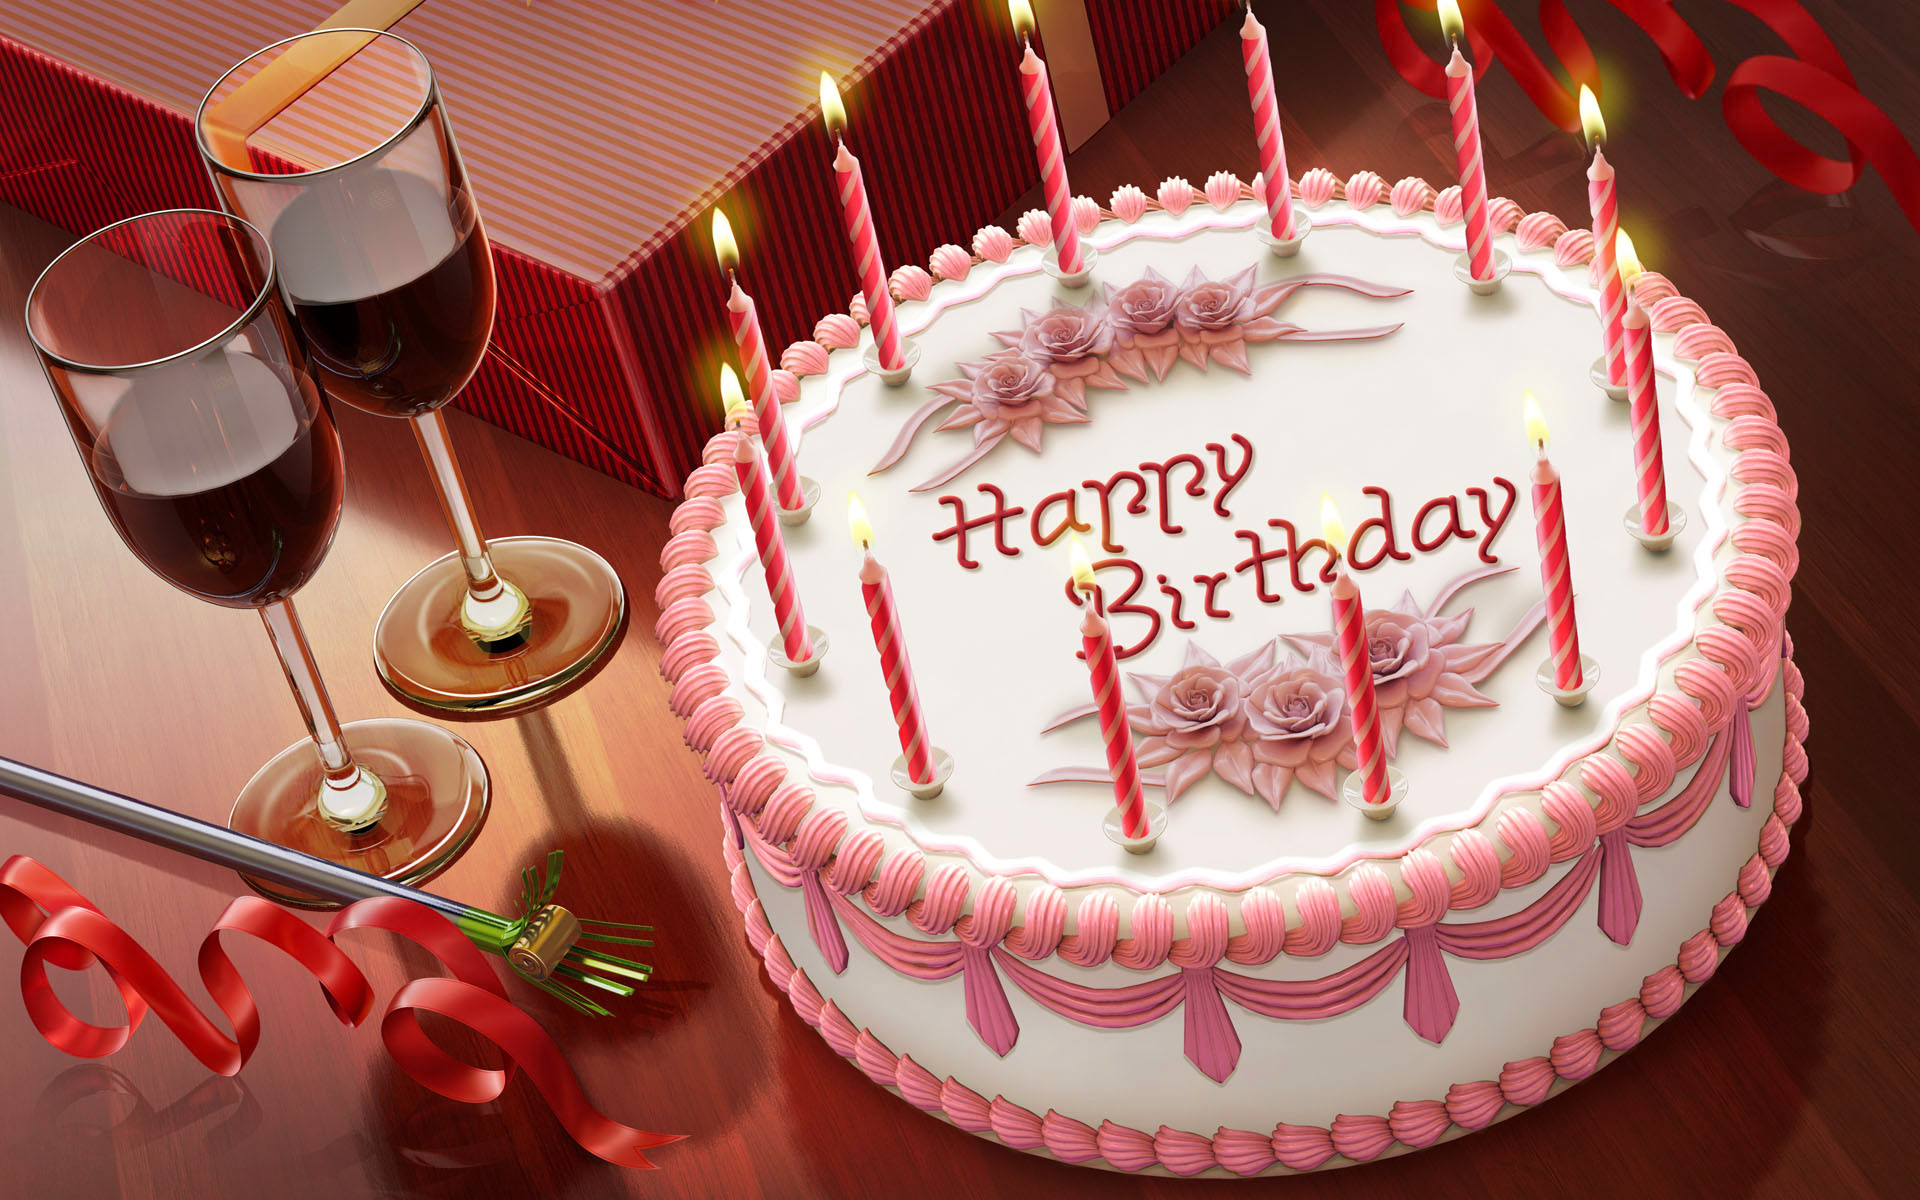 Happy Birthday With Cake Wallpaper Gallery Yopriceville High Quality Free Images And Transparent Png Clipart